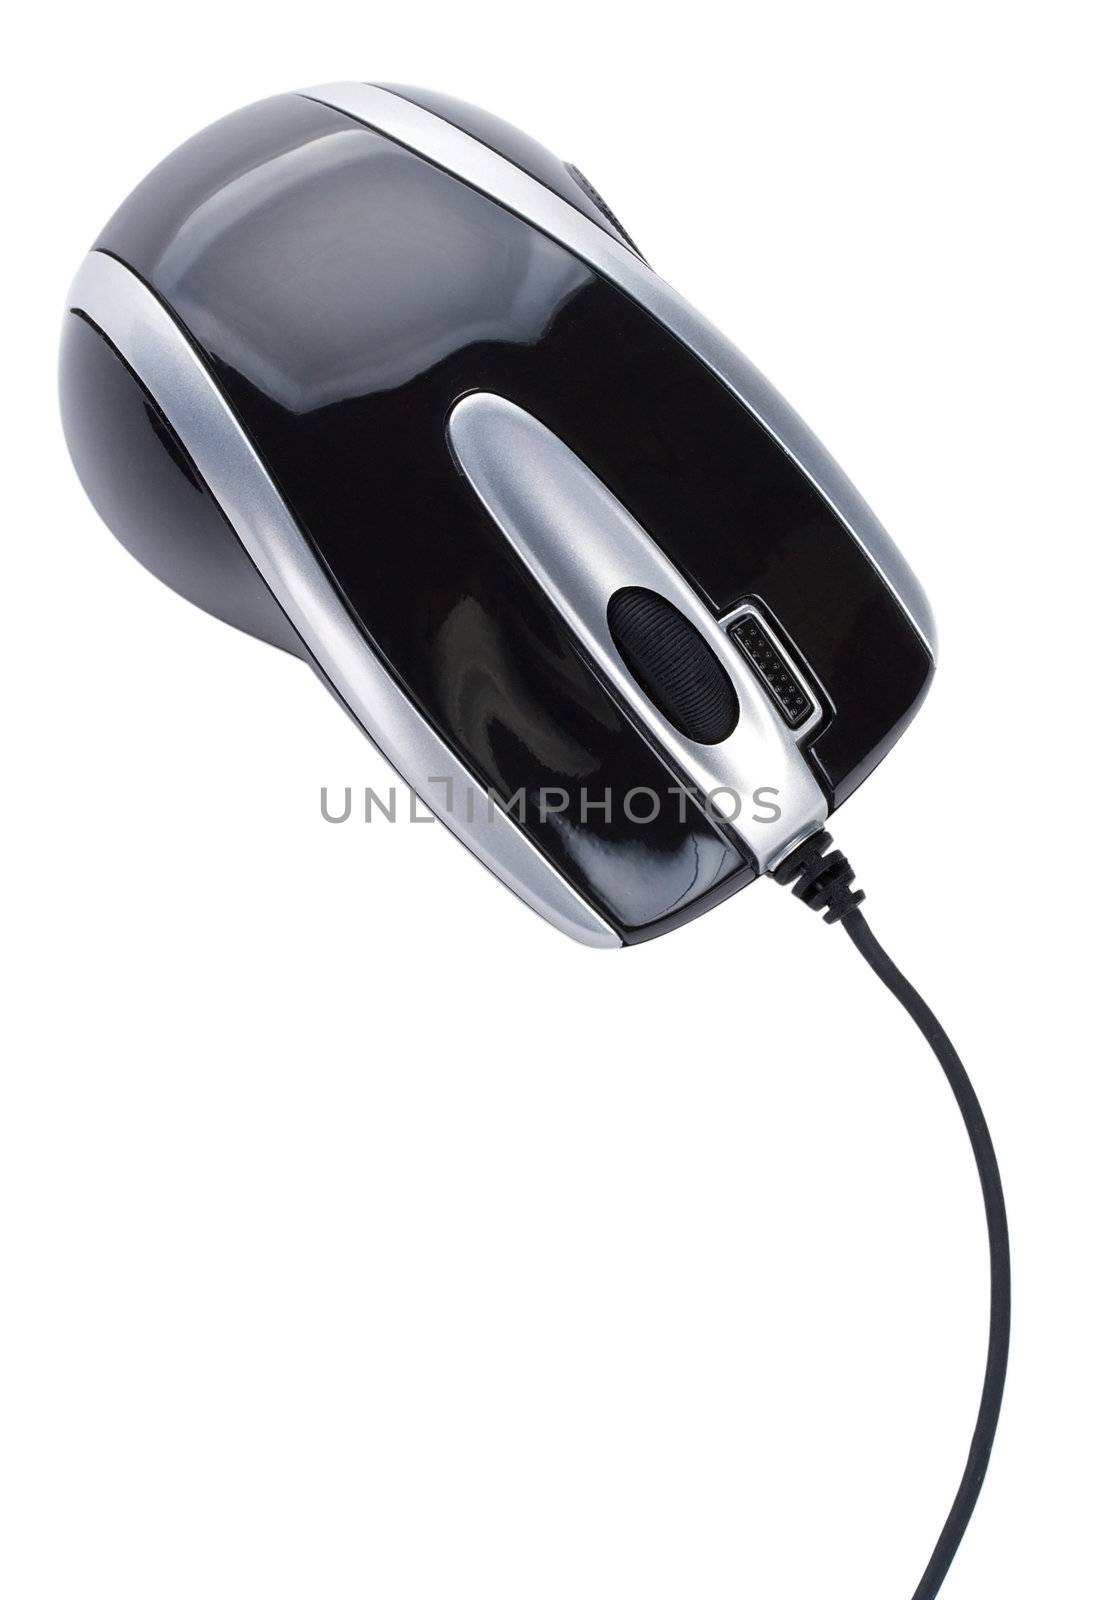 black computer mouse by Alekcey